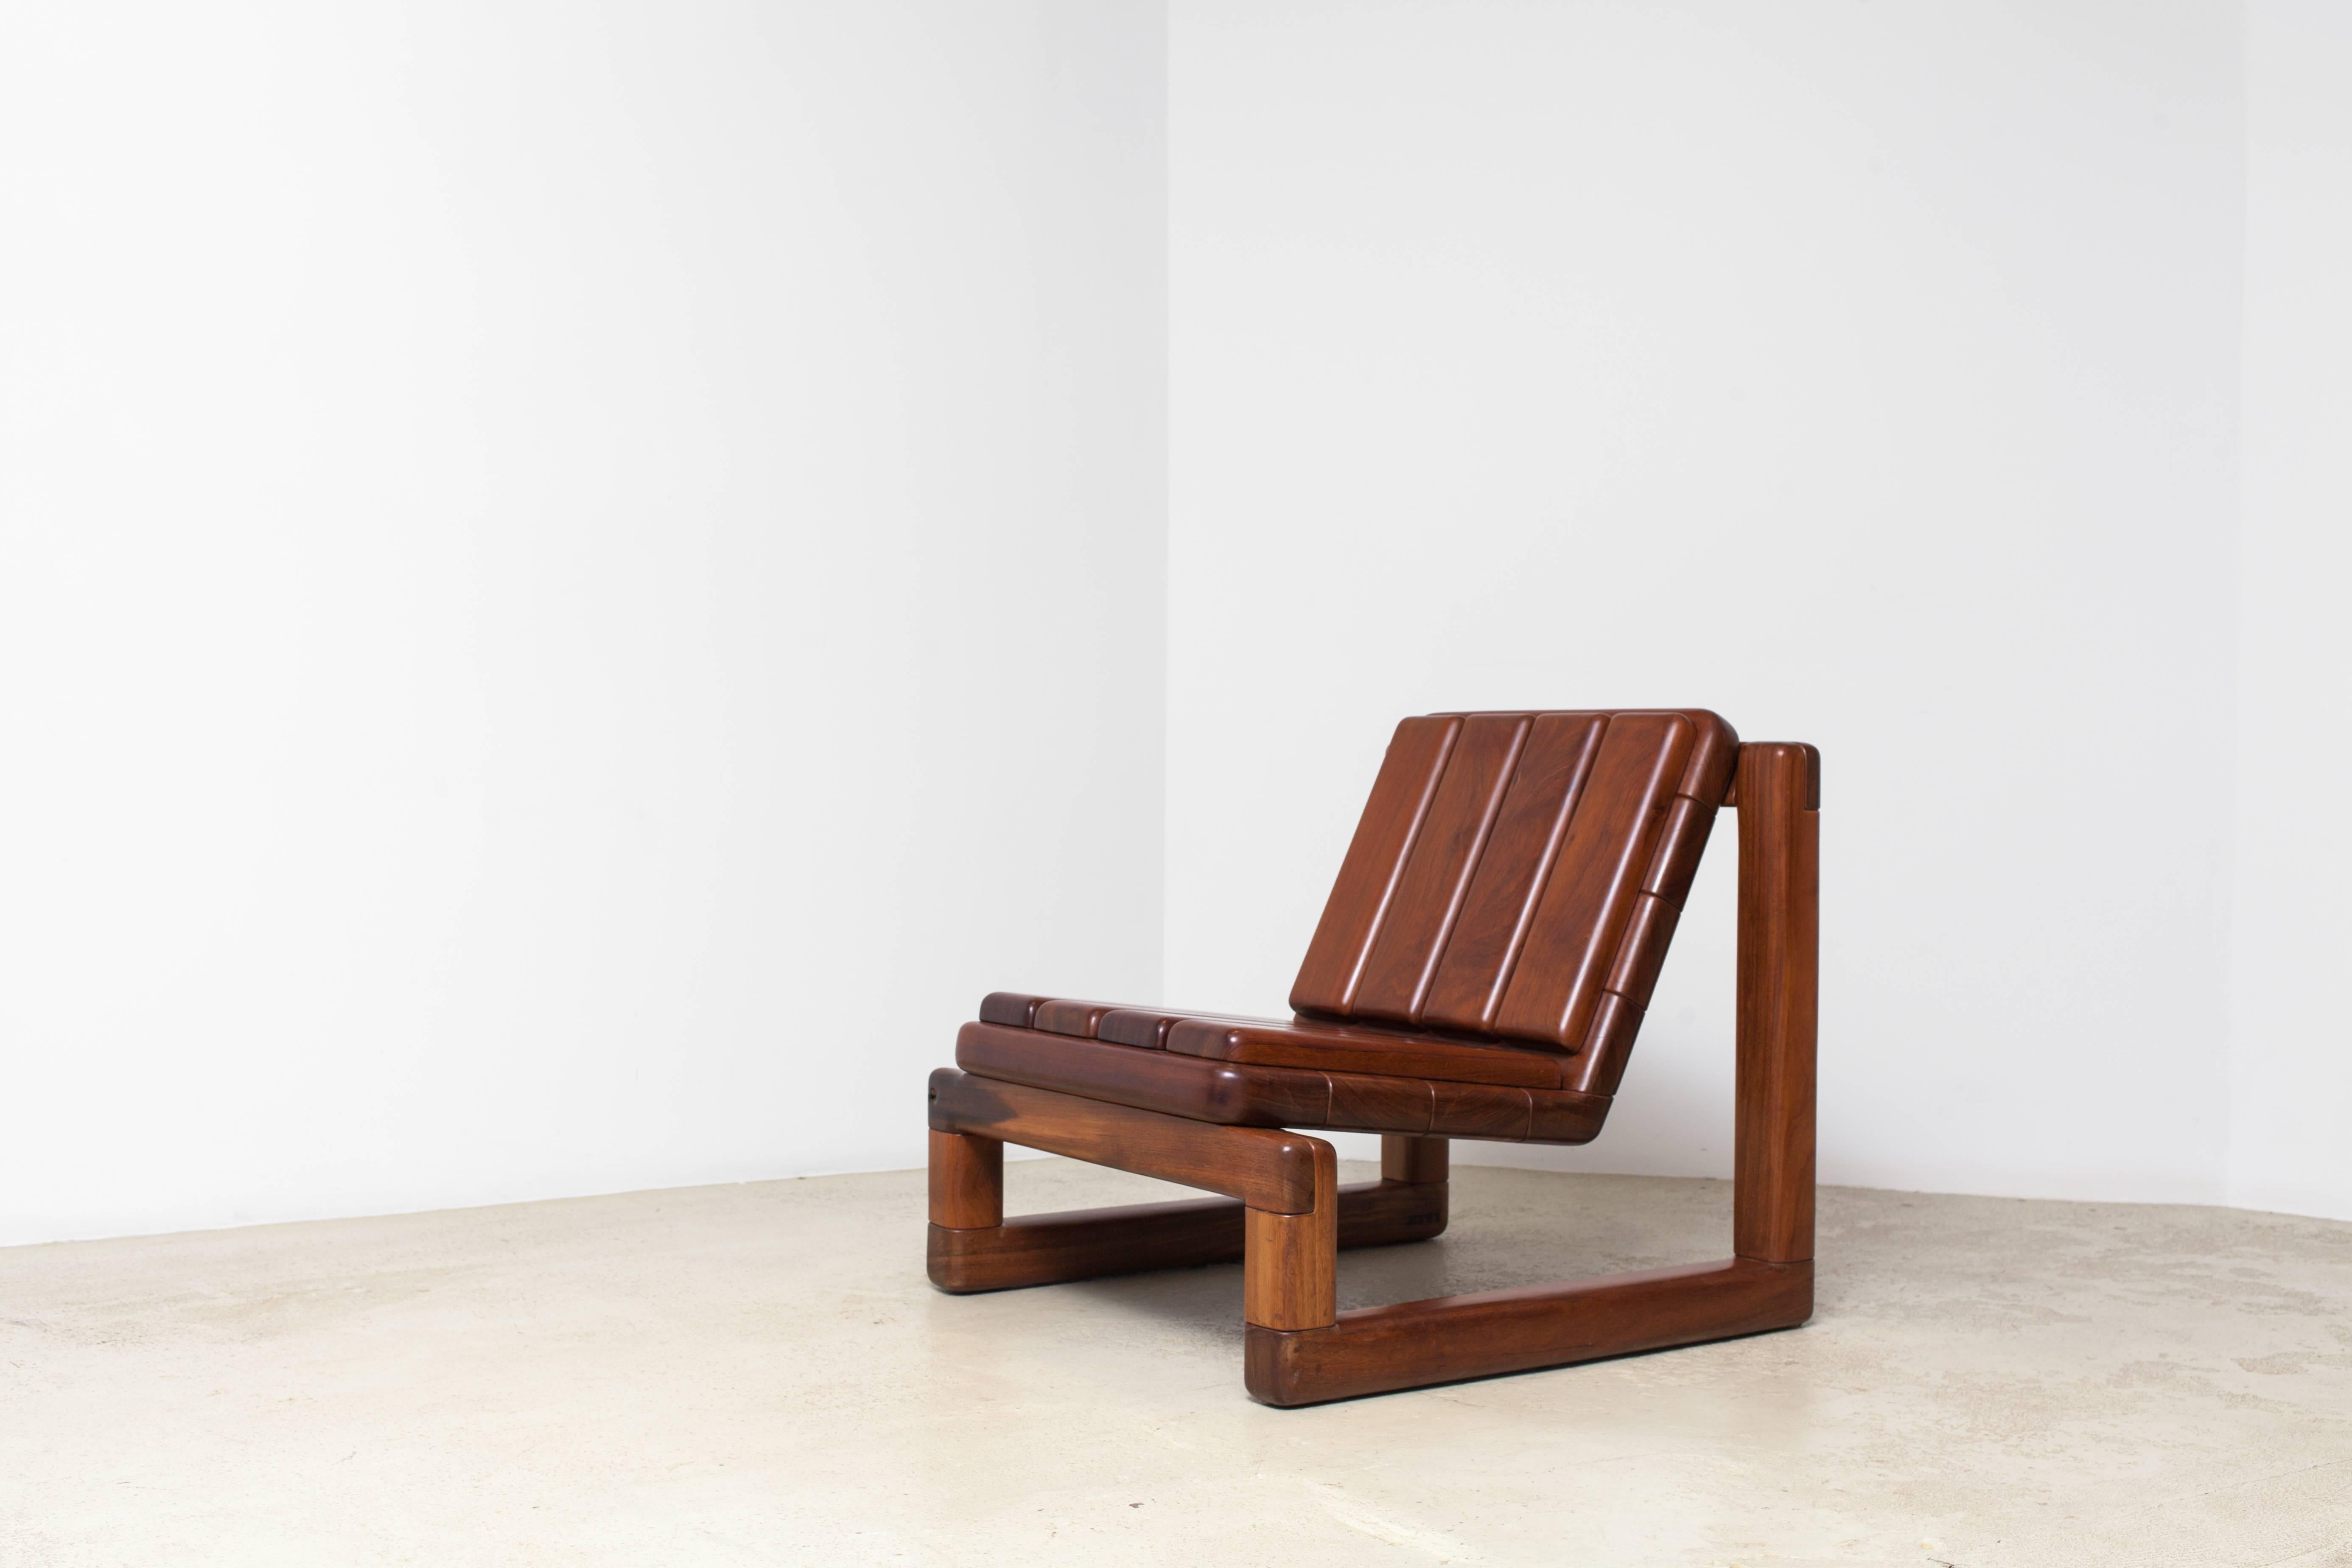 Limited Edition of 1
'Zino' Chair, 2013, handcrafted in reclaimed solid Ipê Wood.